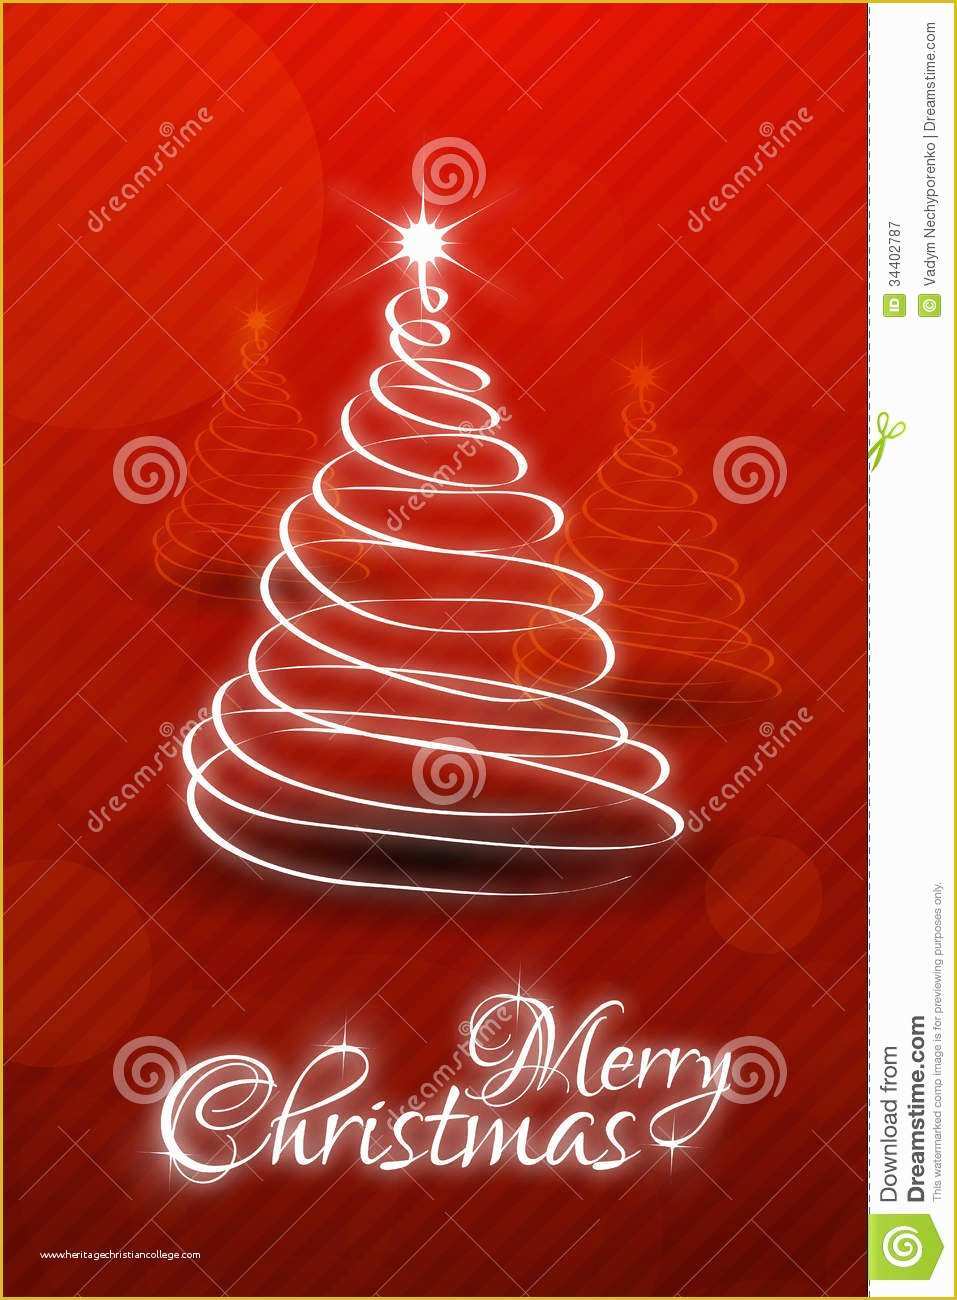 Free Holiday Card Templates Of Christmas Card Template Stock Vector Image Of Copy